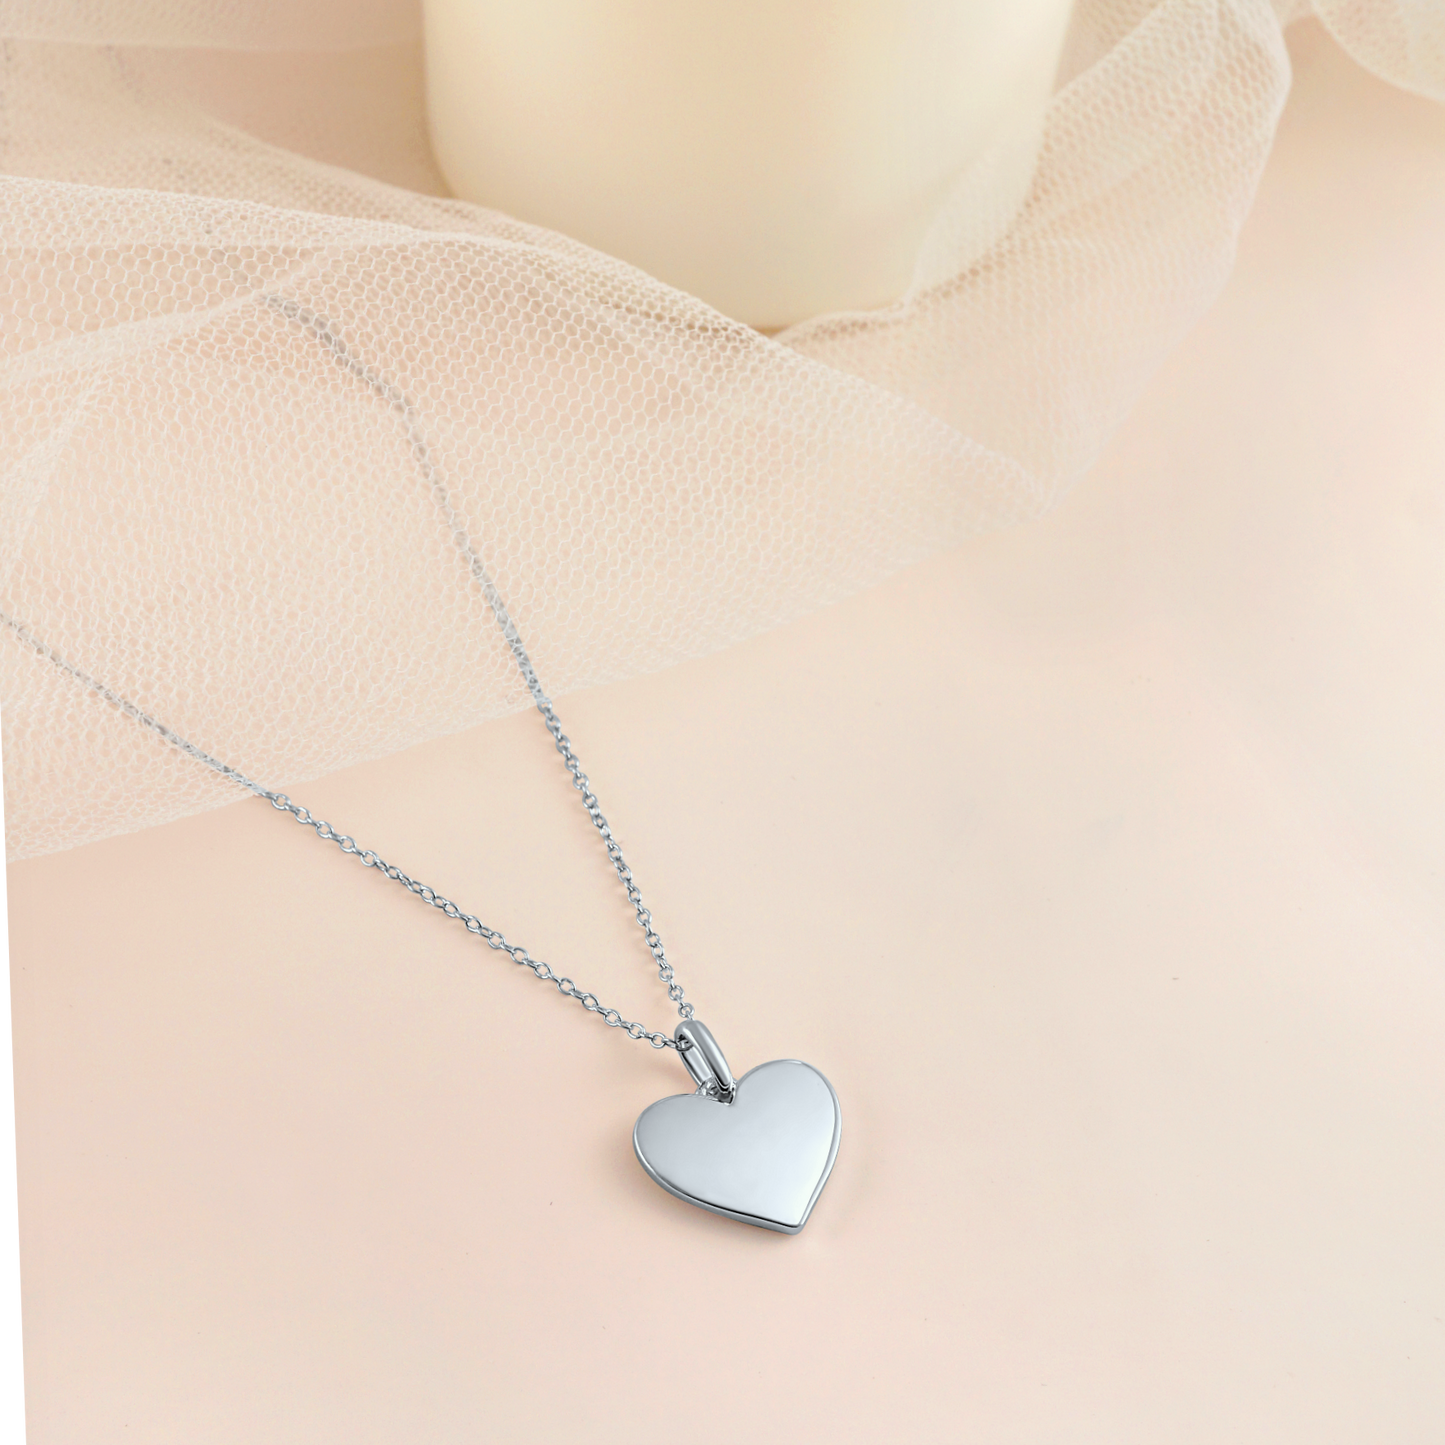 Silver Starry Heart Necklace